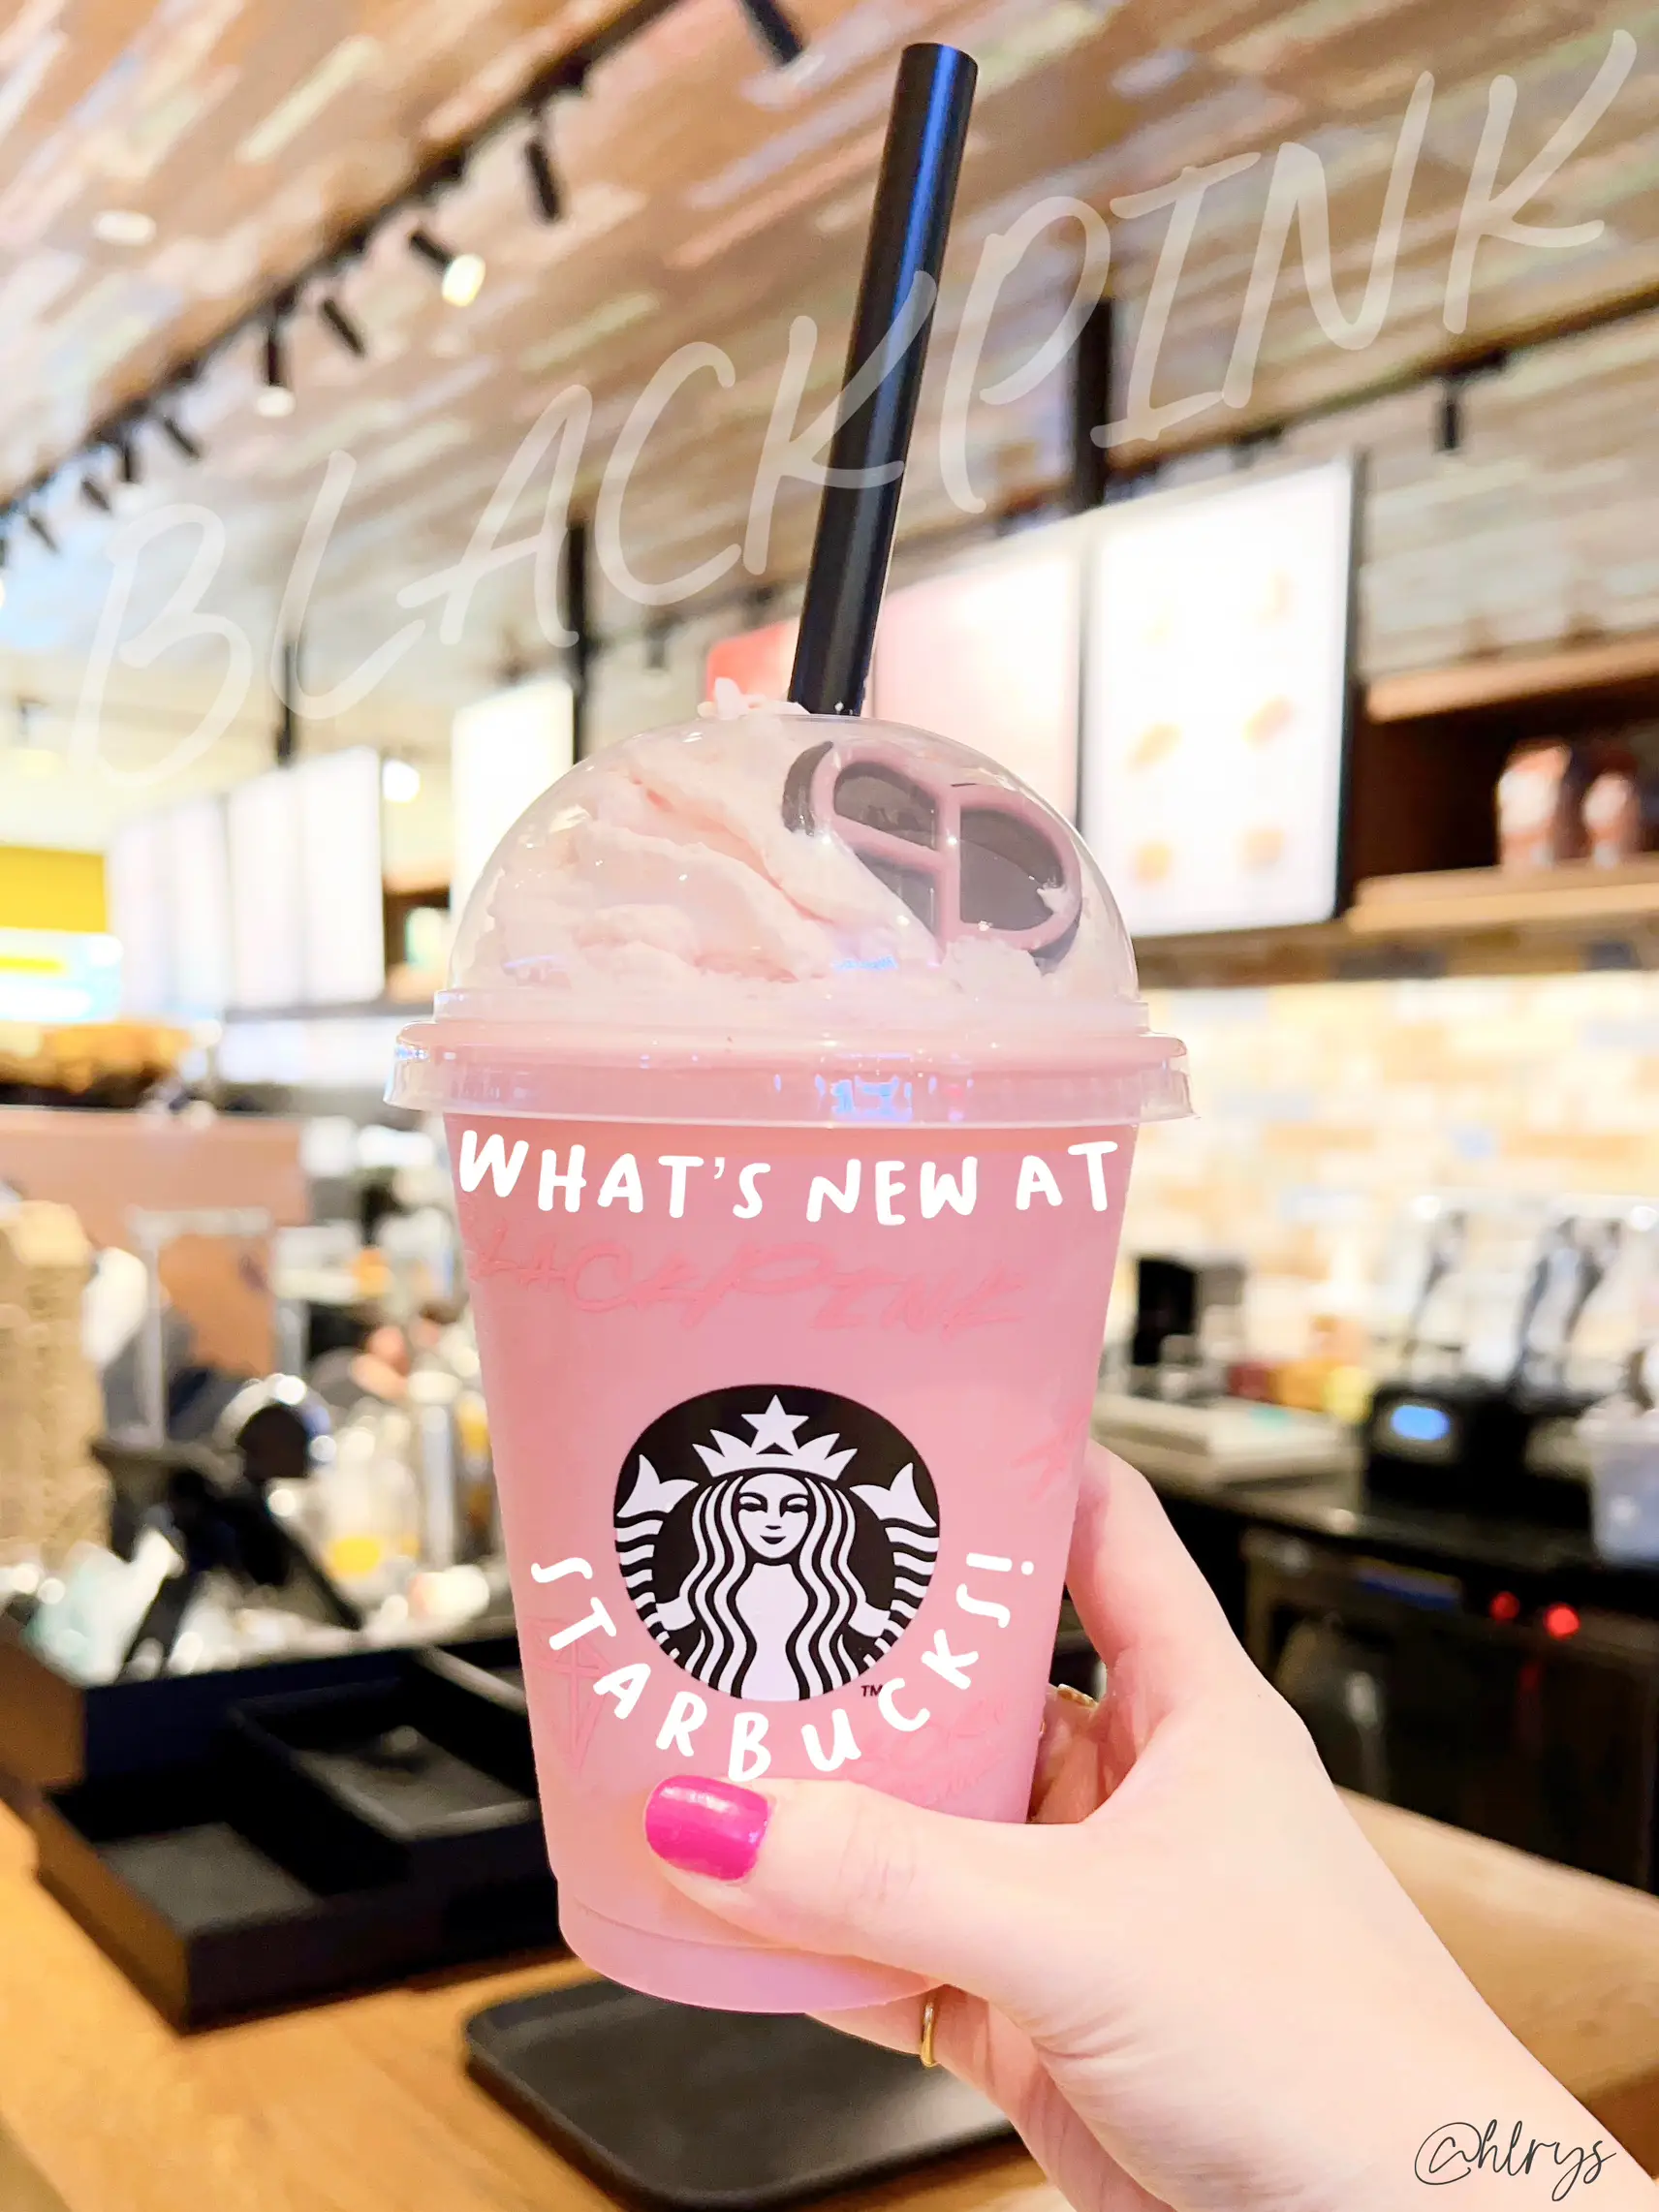 BLACKPINK Is Teaming Up With Starbucks to Launch Drink & Merch Items